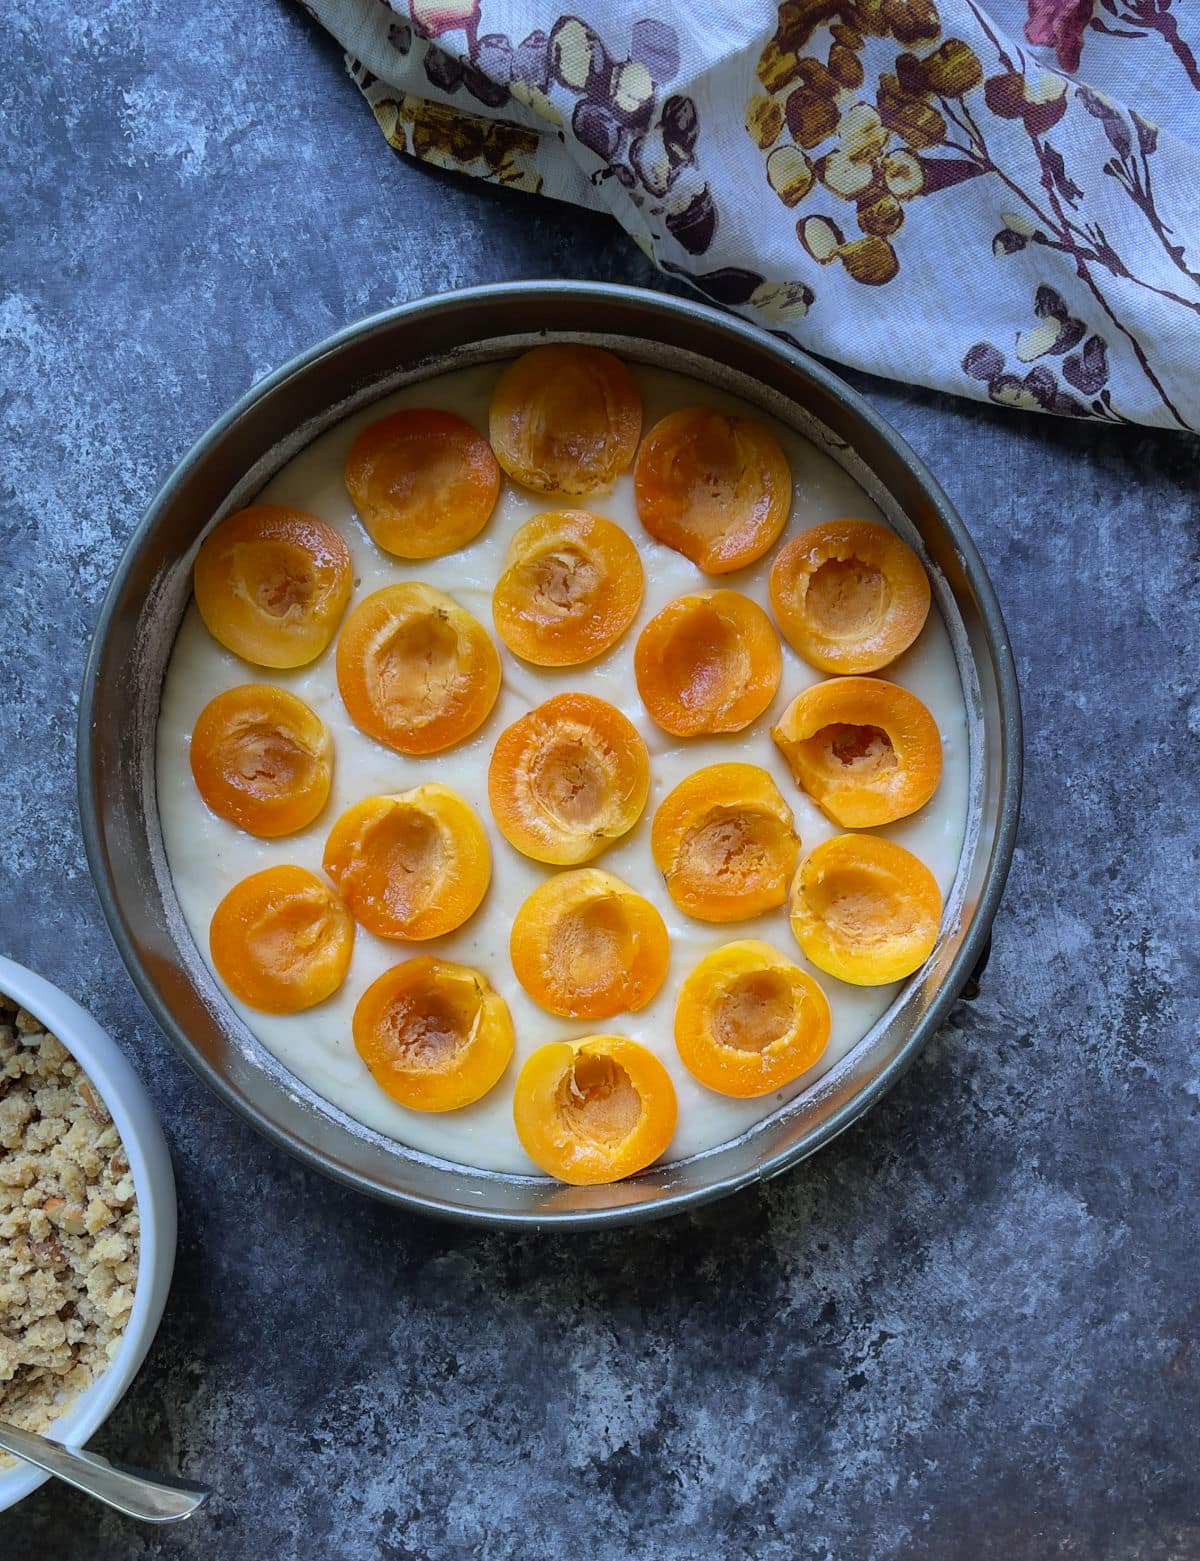 Apricots topped on the cake batter